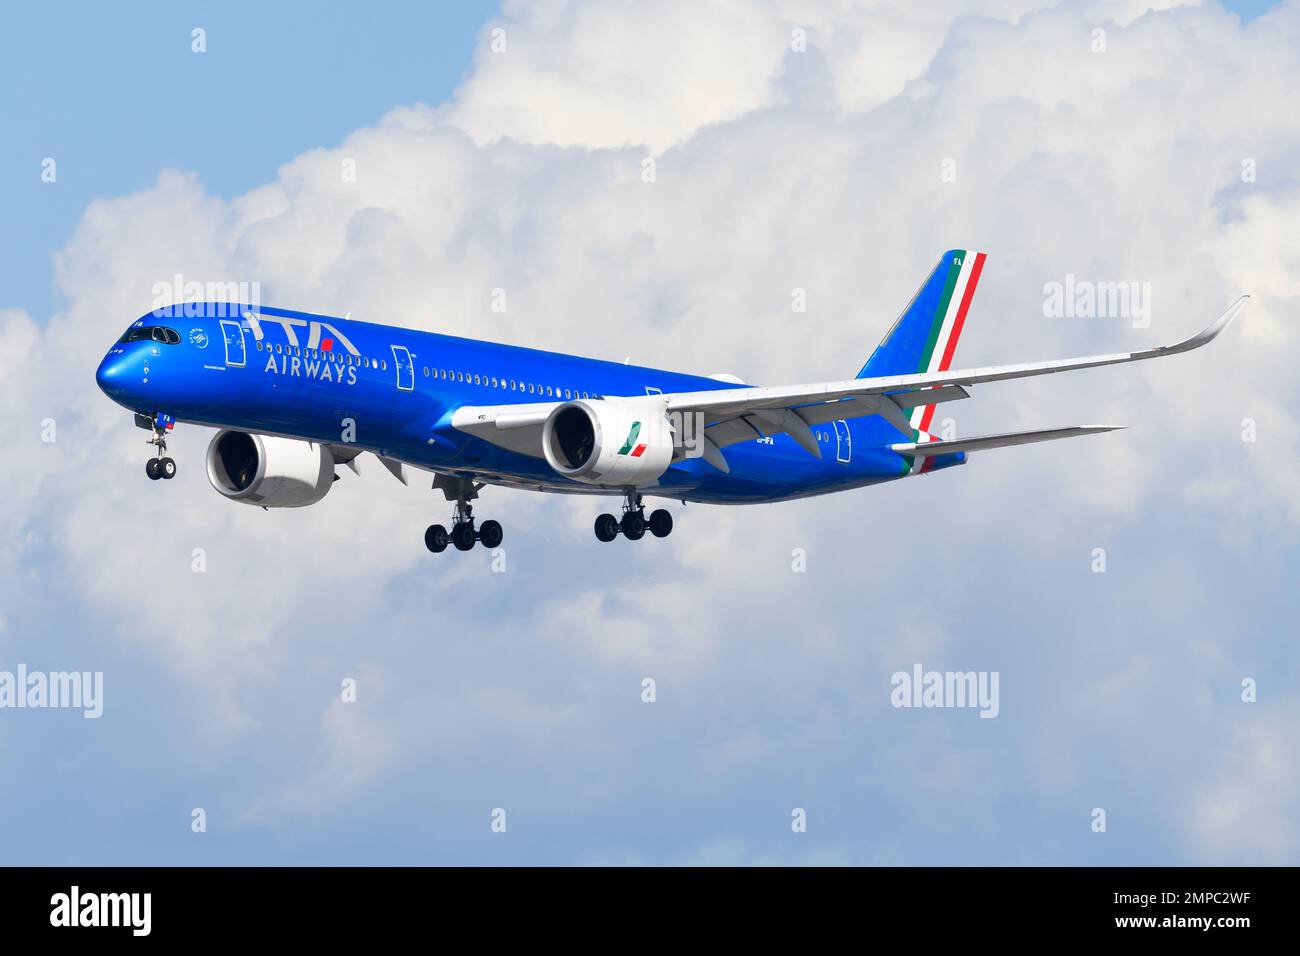 ITA Airways Airbus A350 aircraft landing. New national airline of Italy. Blue livery on airplane A350-900 of ITA Airways, Italia Transporto Aereo. Stock Photo